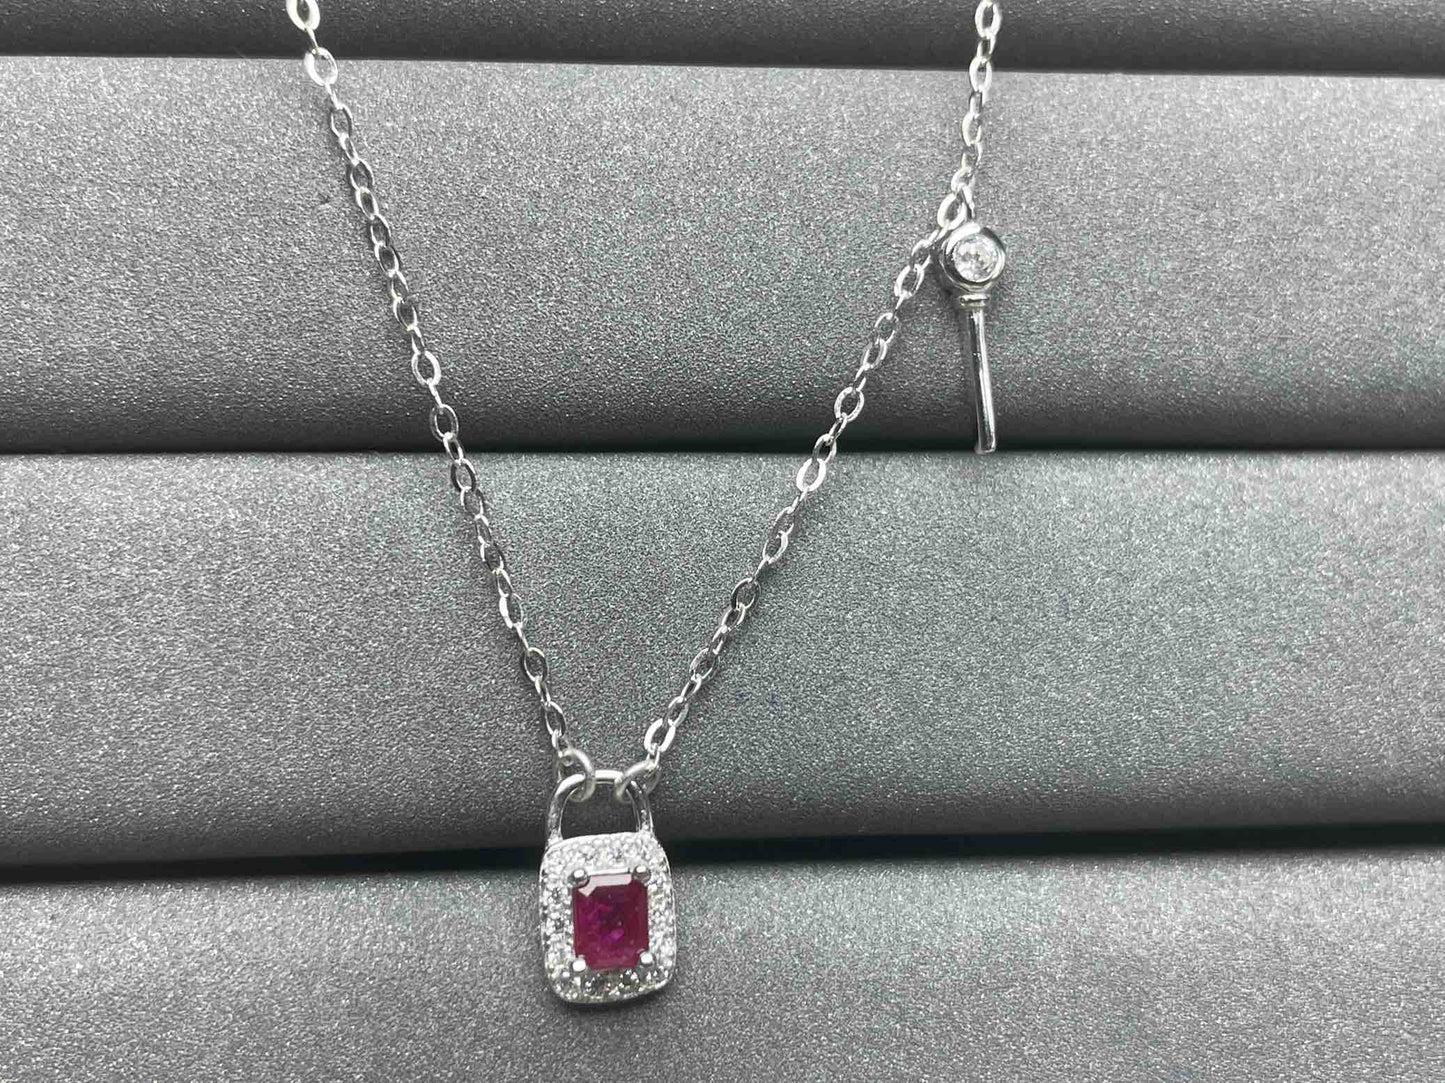 A1153 Ruby Necklace